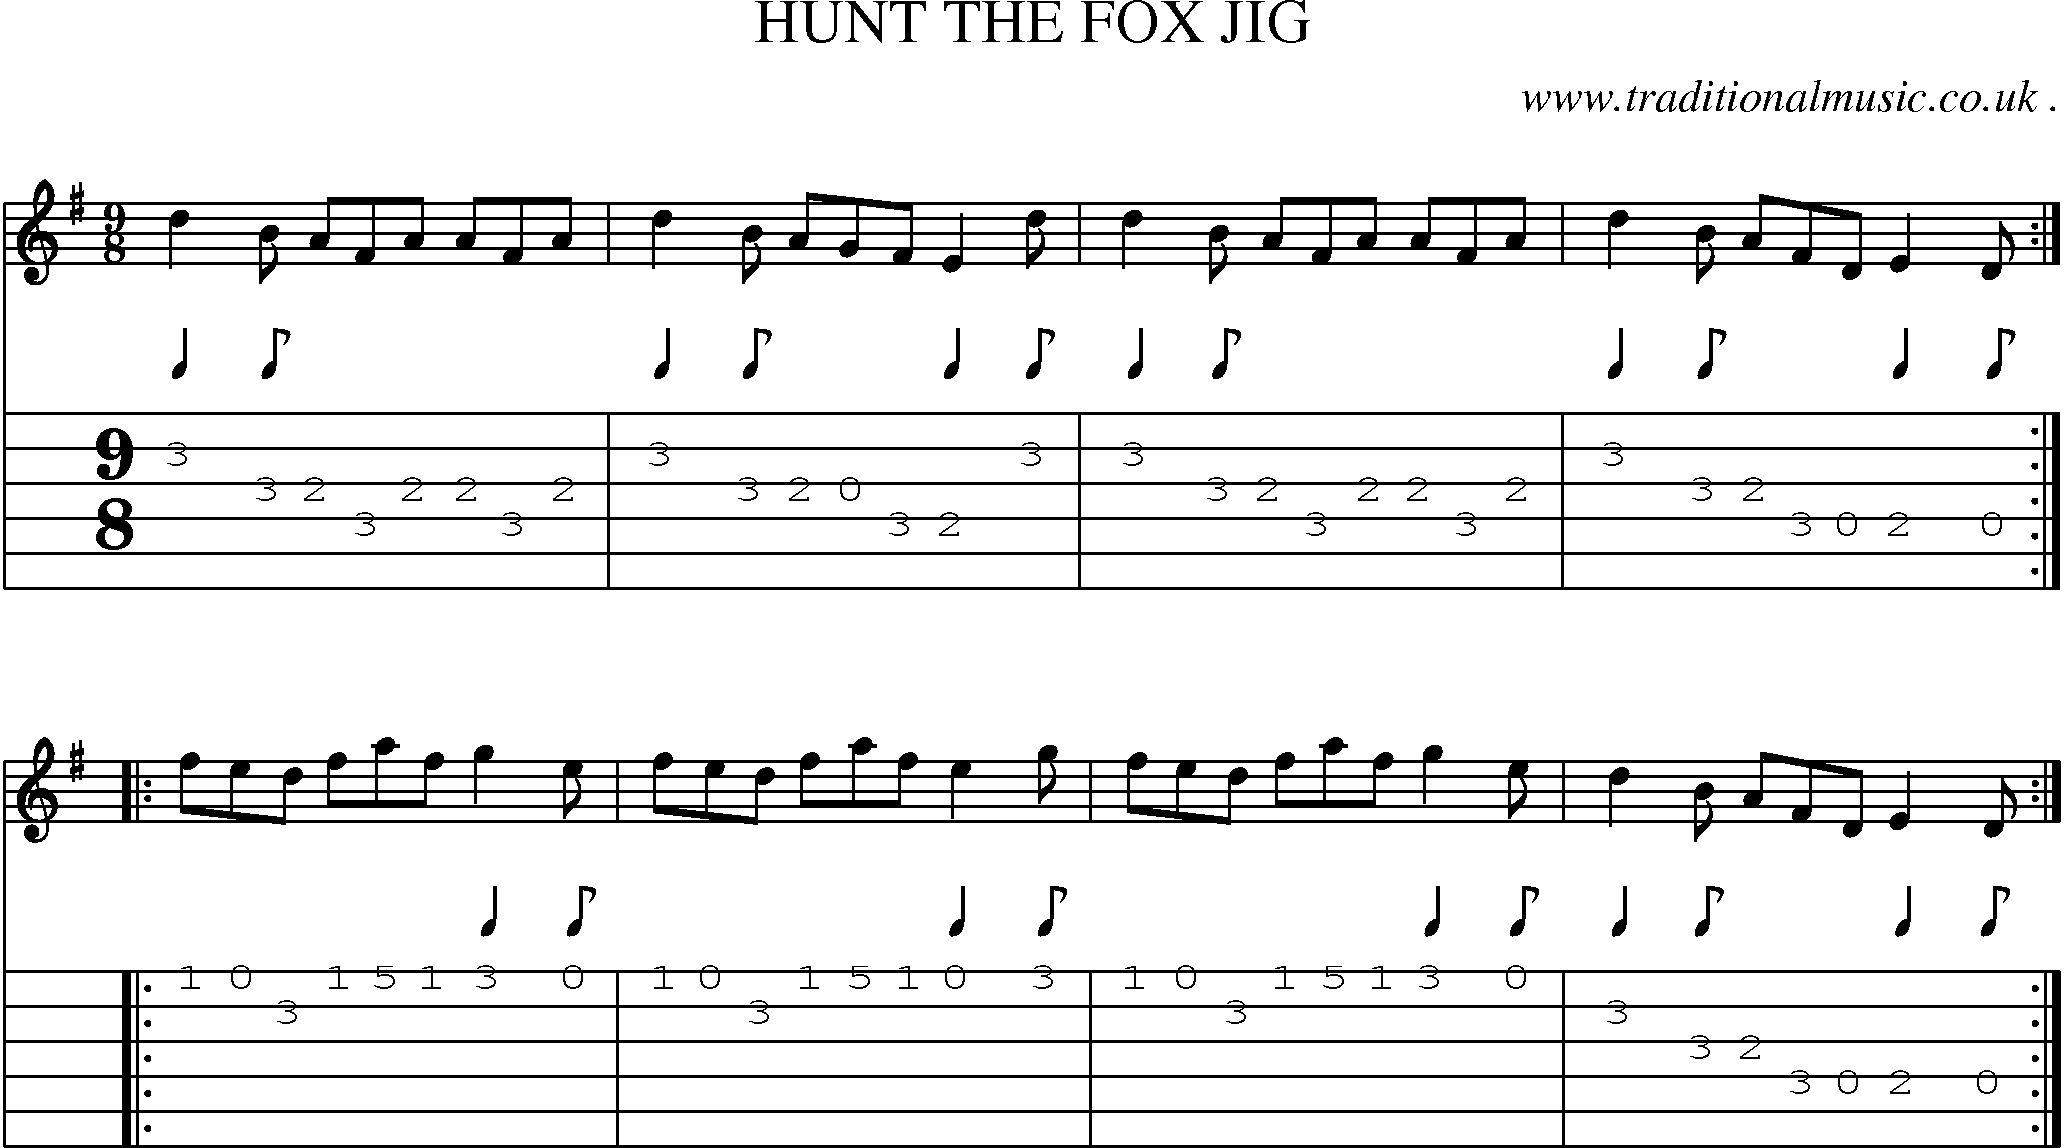 Sheet-Music and Guitar Tabs for Hunt The Fox Jig